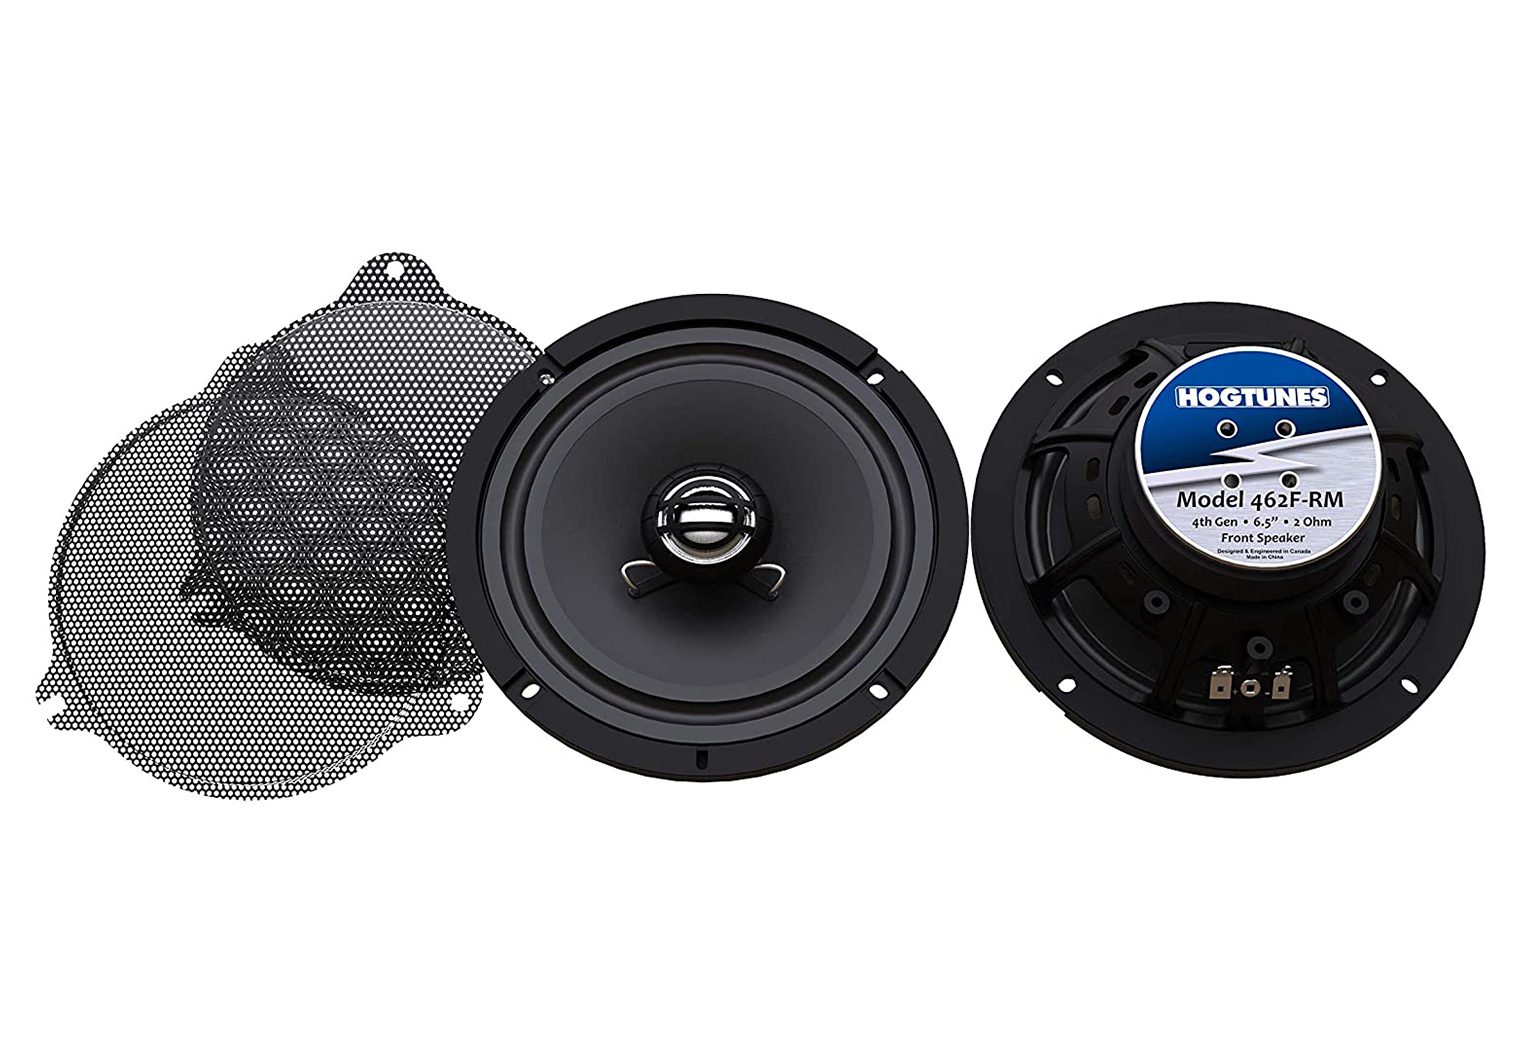 Hogtunes 462F-RM main image with speakers and grilles